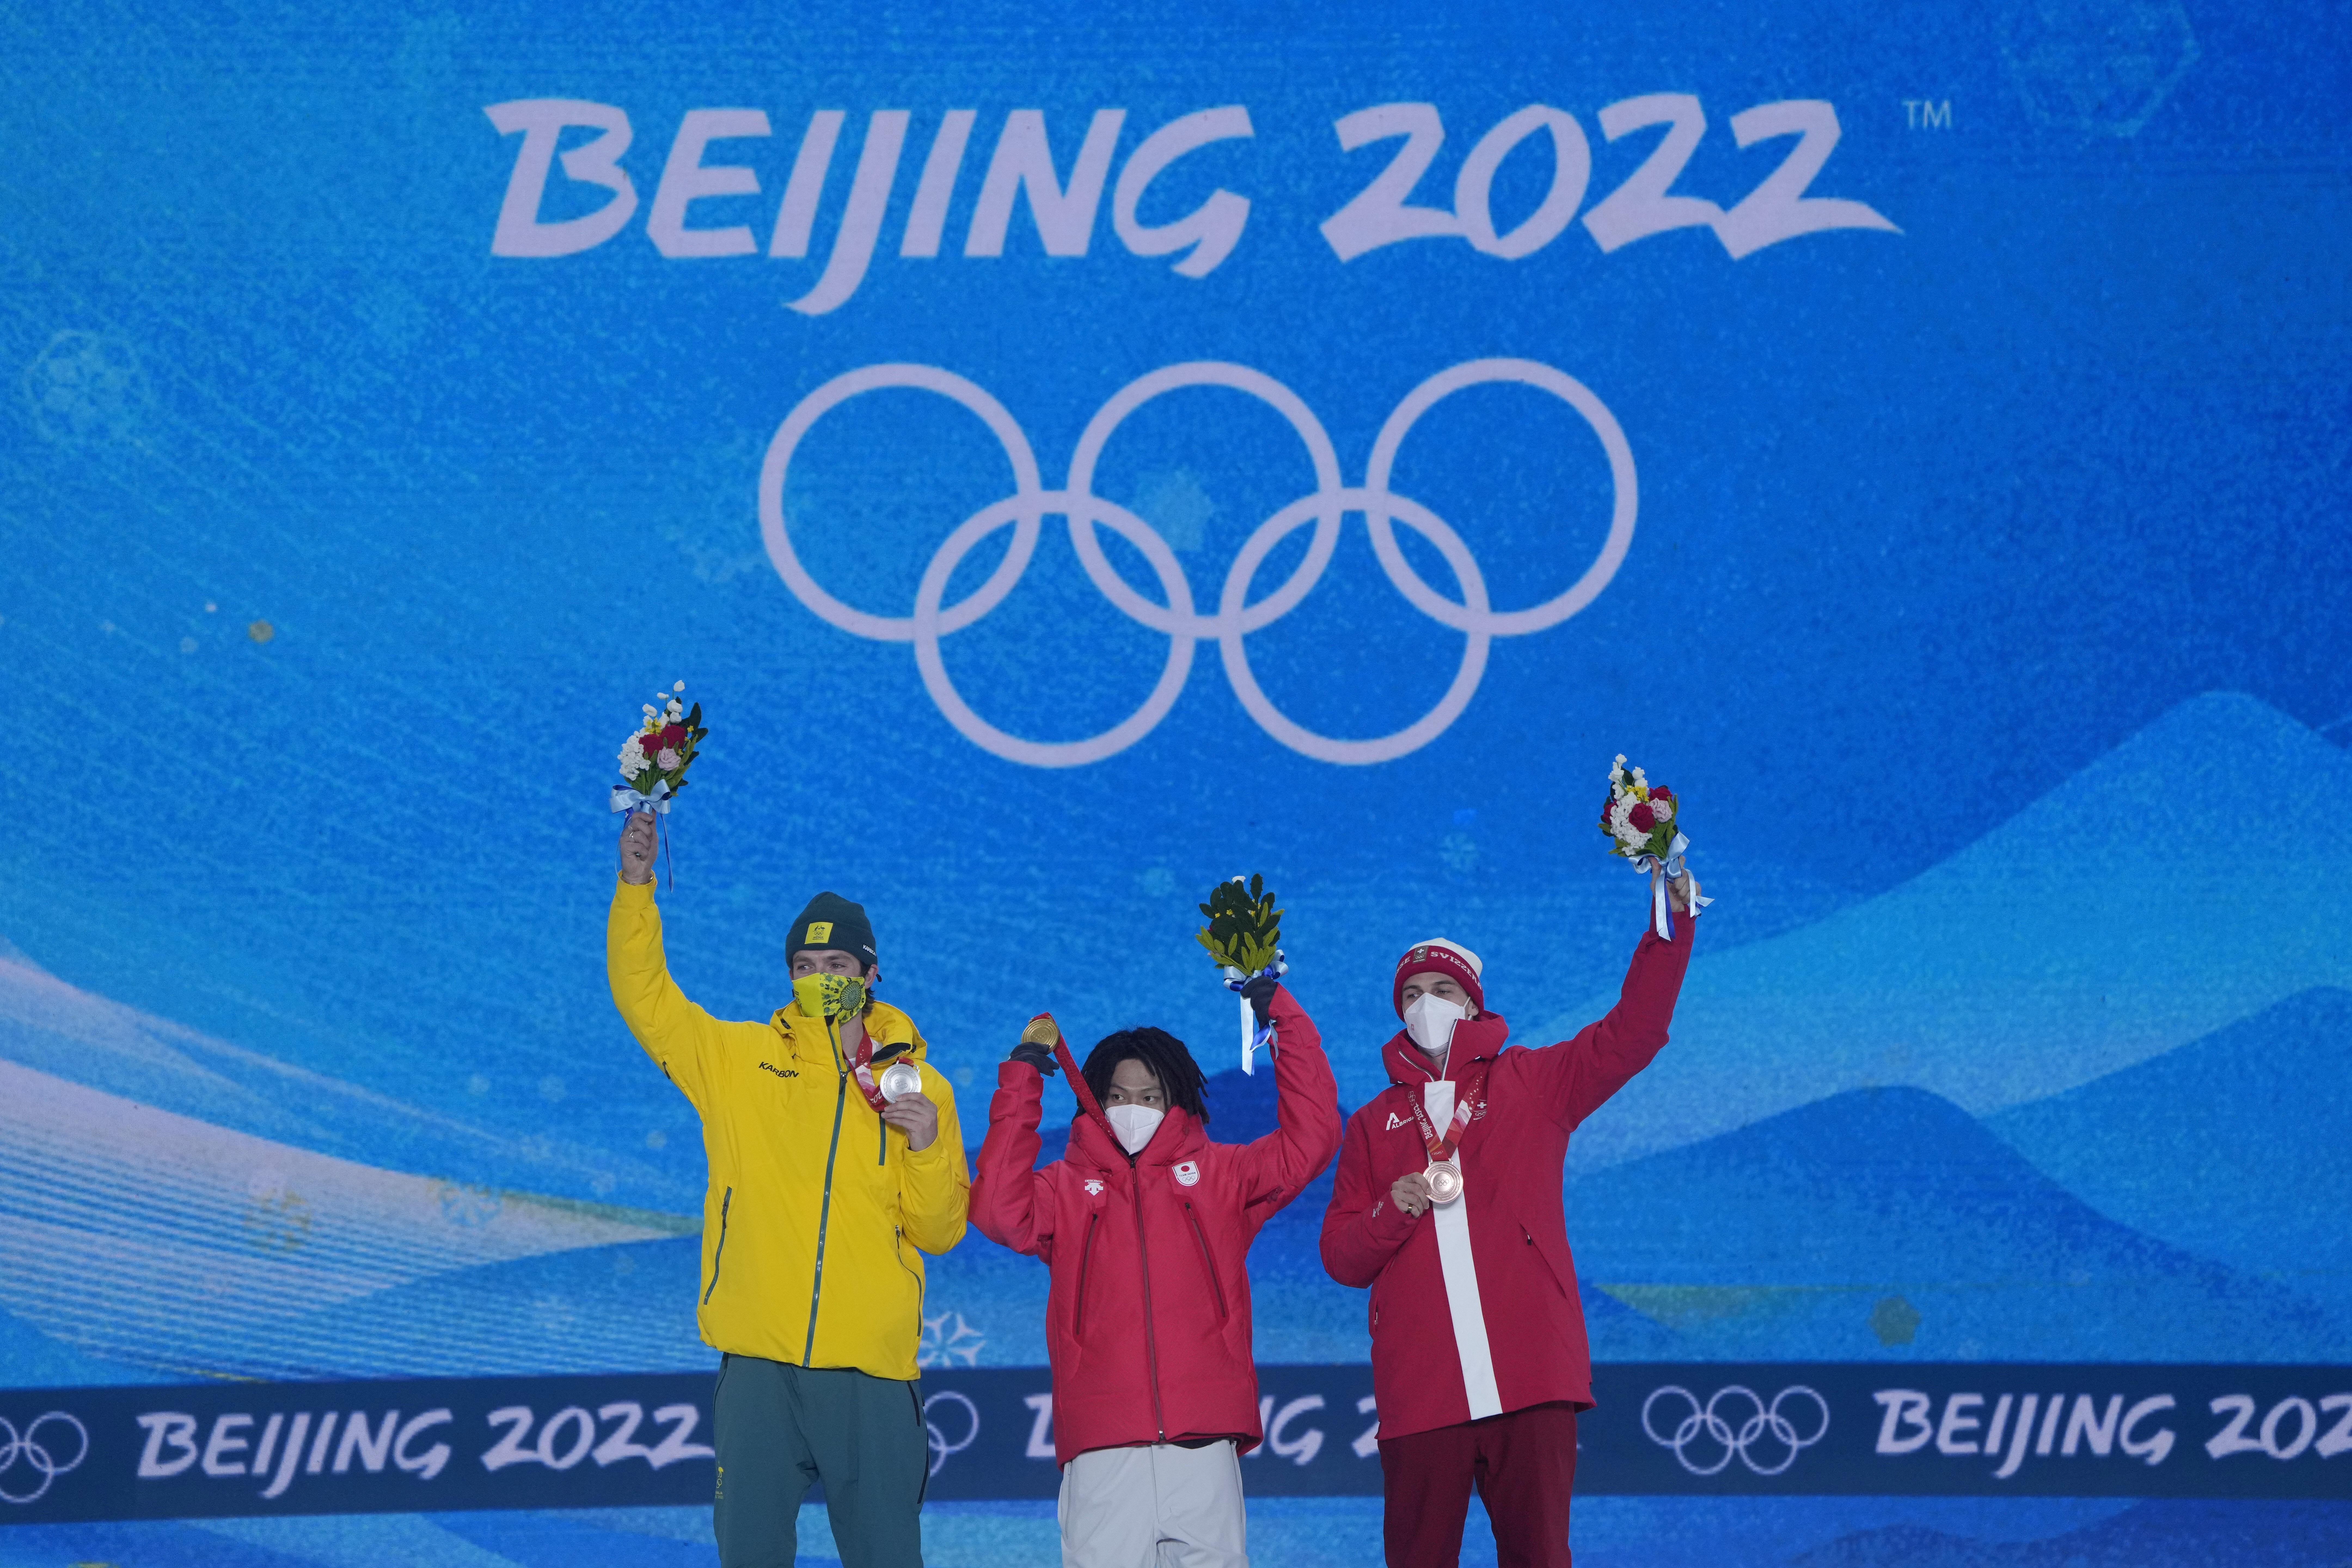 <p>From left silver medalist Australia&#8217;s Scotty James, gold medalist Japan&#8217;s Ayumu Hirano and bronze medalist Switzerland&#8217;s Jan Scherrer celebrate during a medal ceremony for the men&#8217;s halfpipe at the 2022 Winter Olympics, Friday, Feb. 11, 2022, in Zhangjiakou, China.</p>
